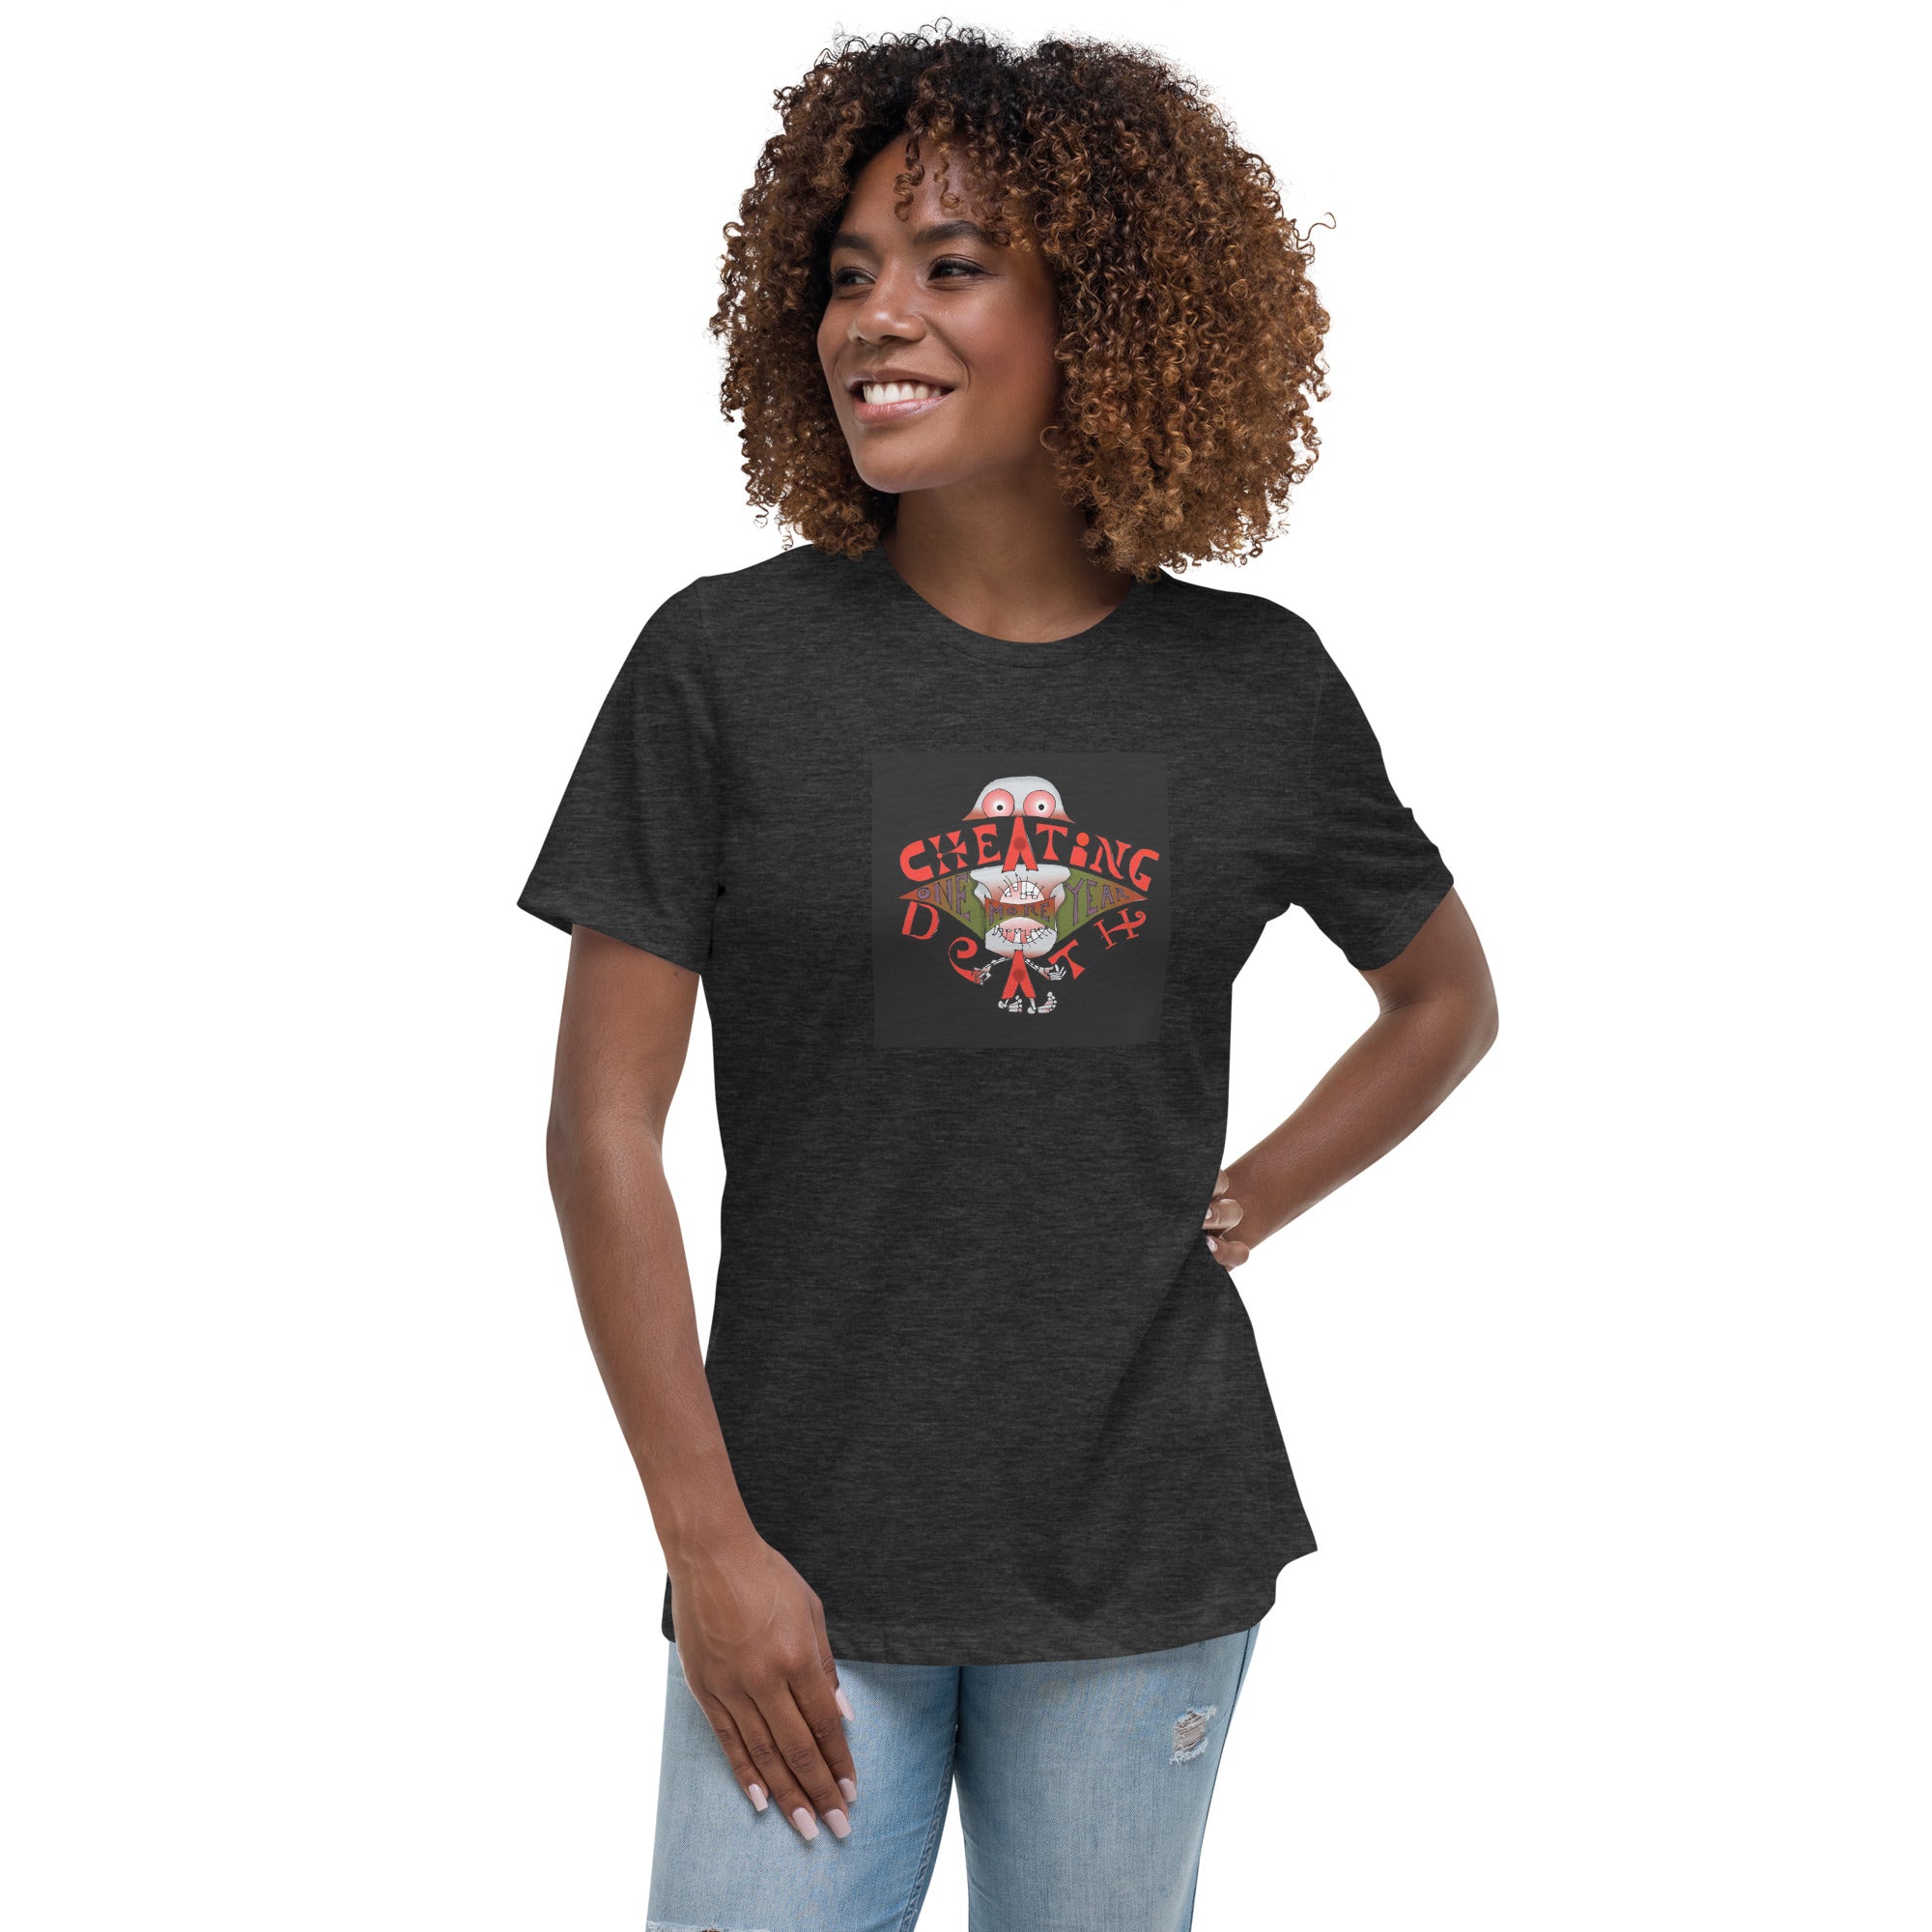 Women's Relaxed T-Shirt, Sundries for Time